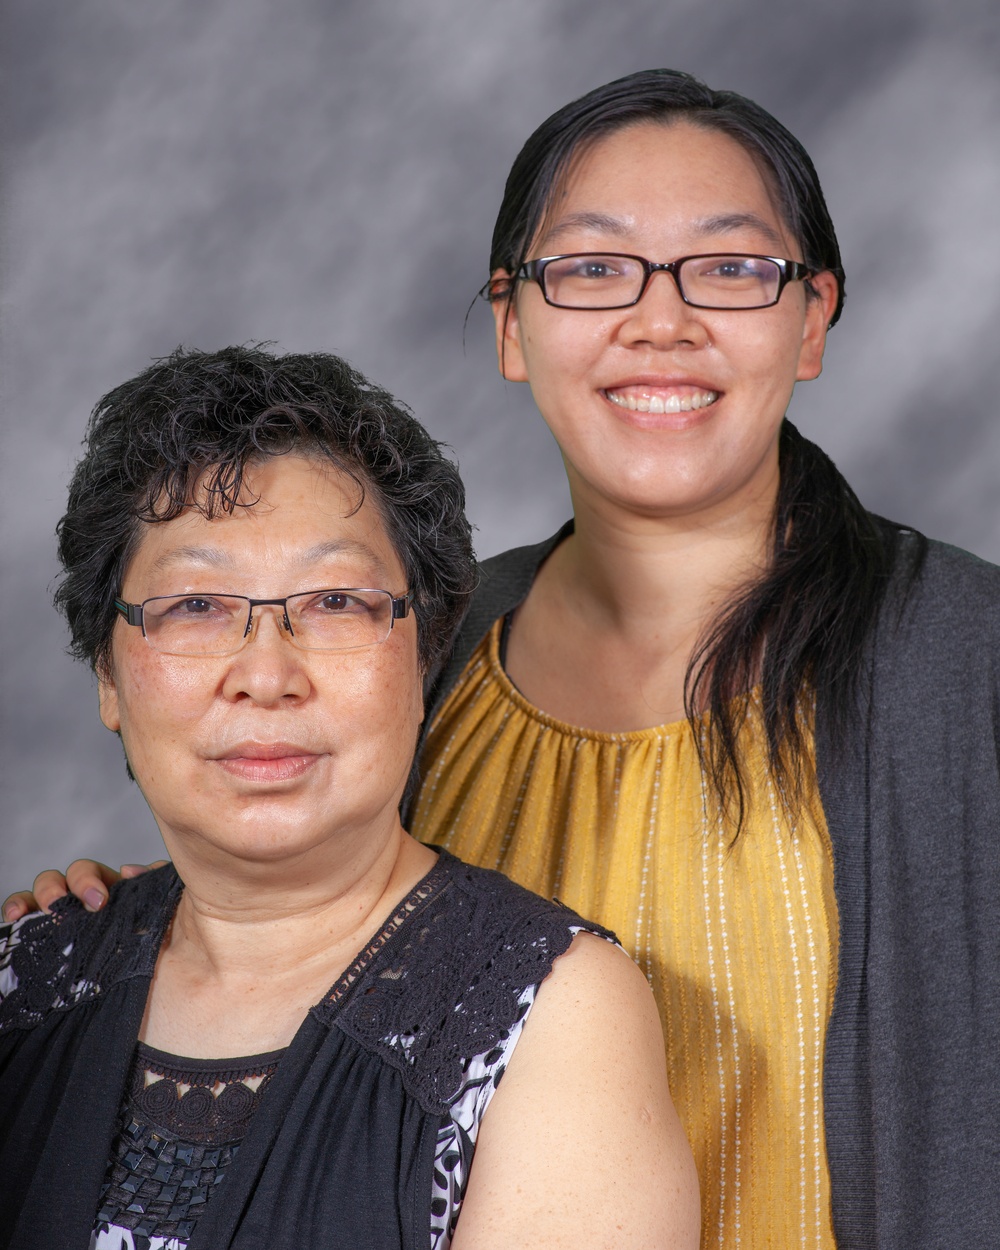 BMACH Pharmacy: Like Mother, Like Daughter